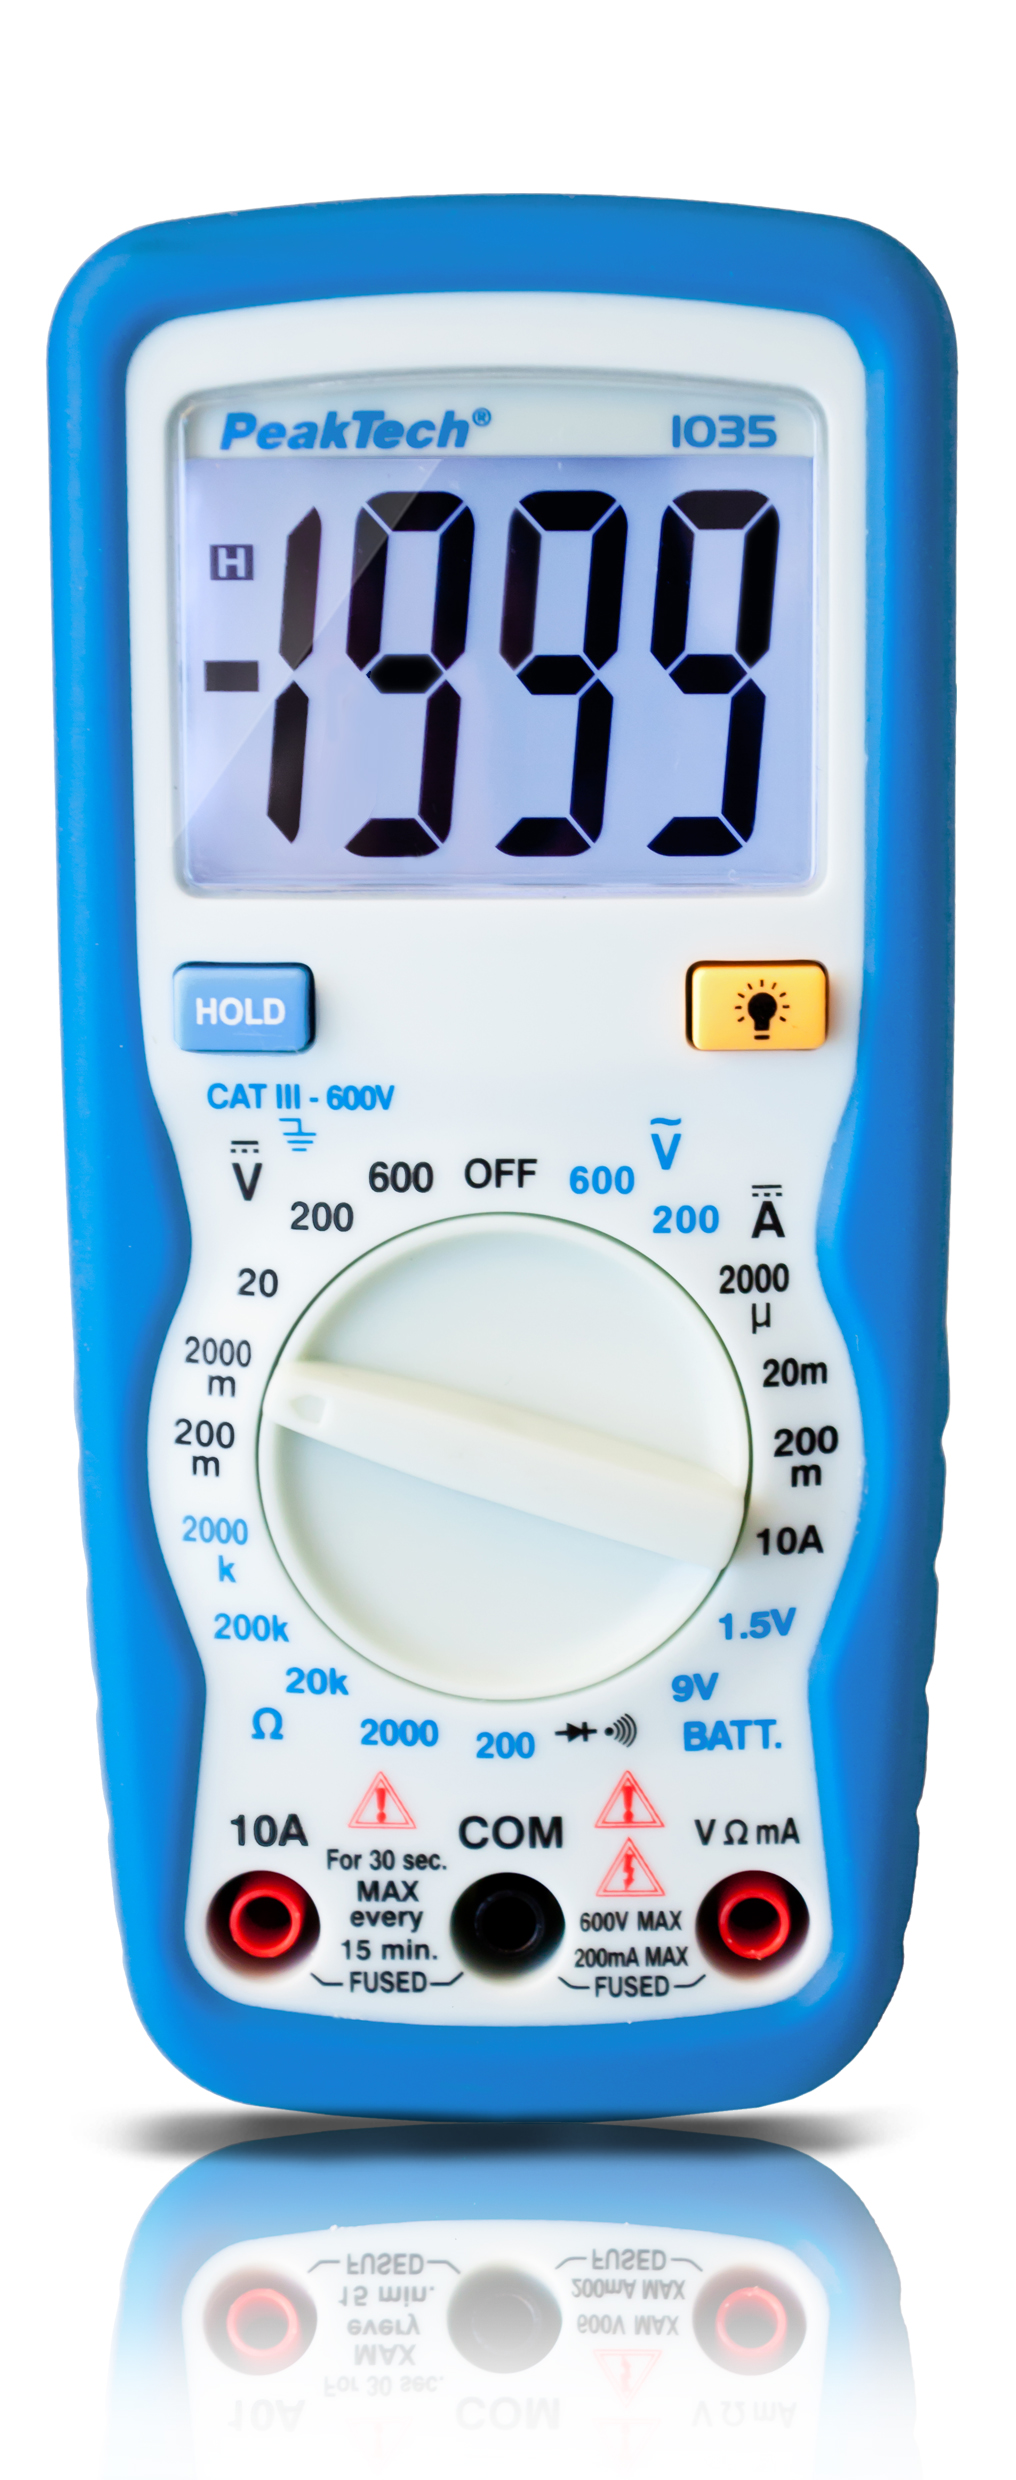 PeakTech 1070 Digital Multimeter CAT III with LCD Display Battery Tester Electronic Ammeter AC/DC Voltmeter Temperature Measurements Manual Multimeter TÜV/GS Continuity Tester Max 300 V 